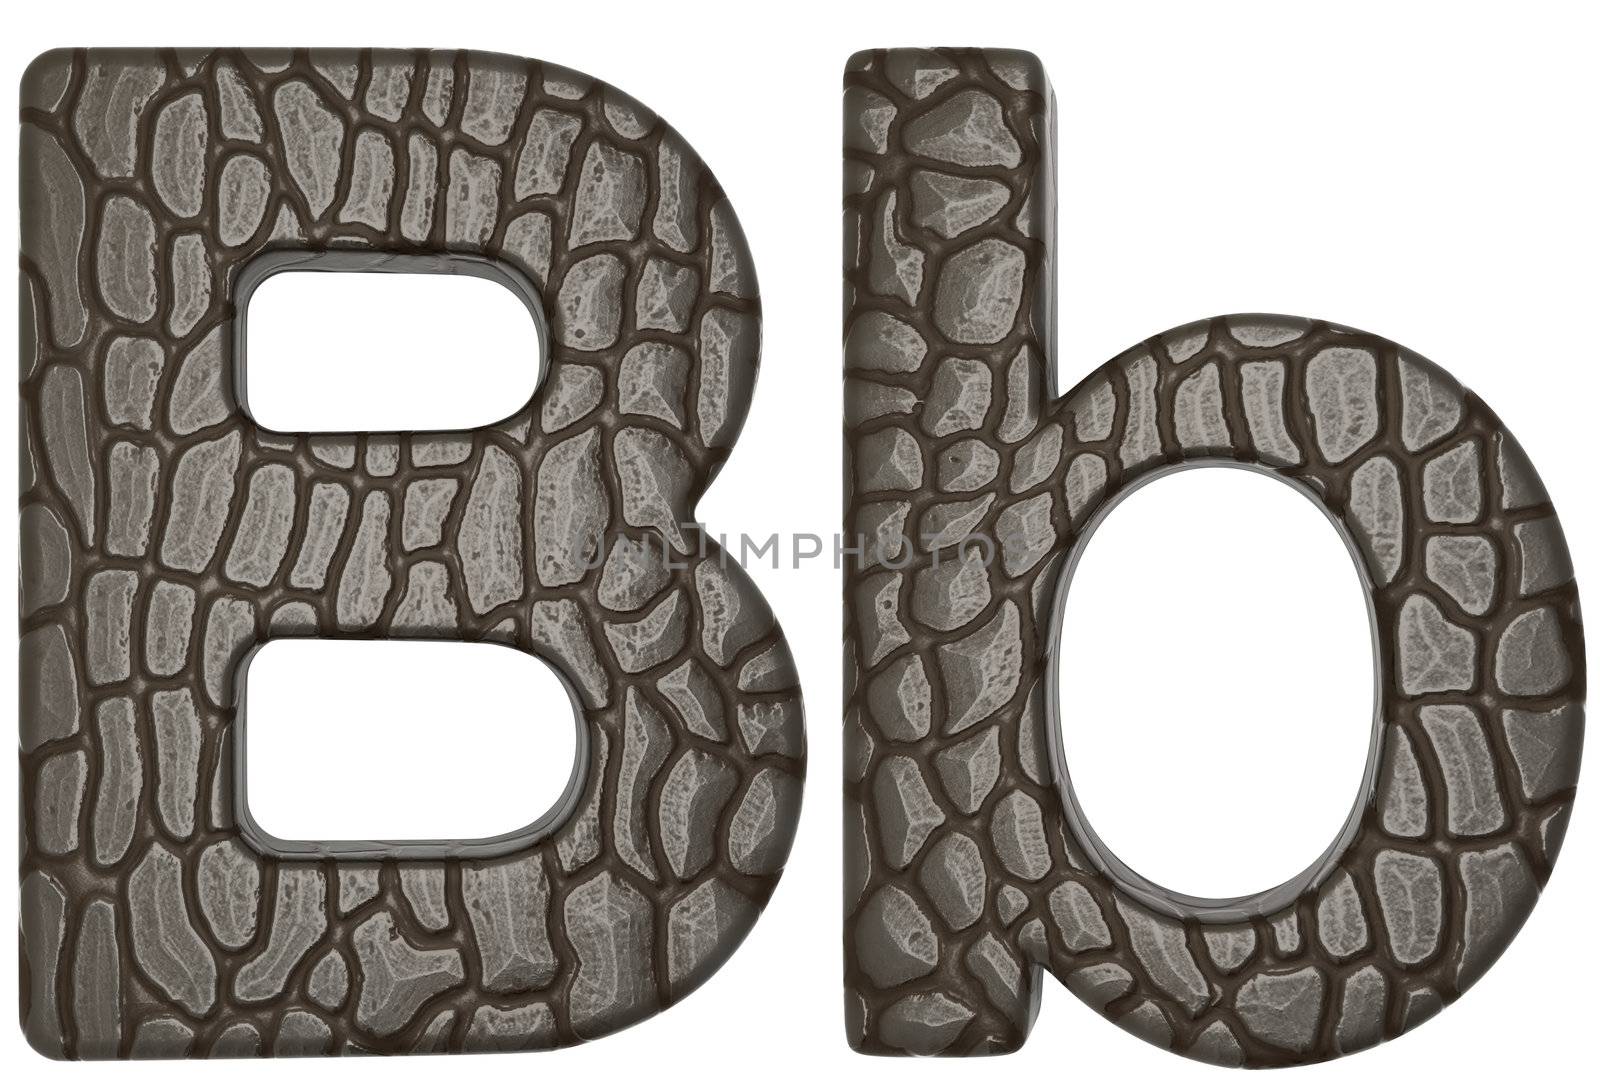 Alligator skin font B lowercase and capital letters isolated on white